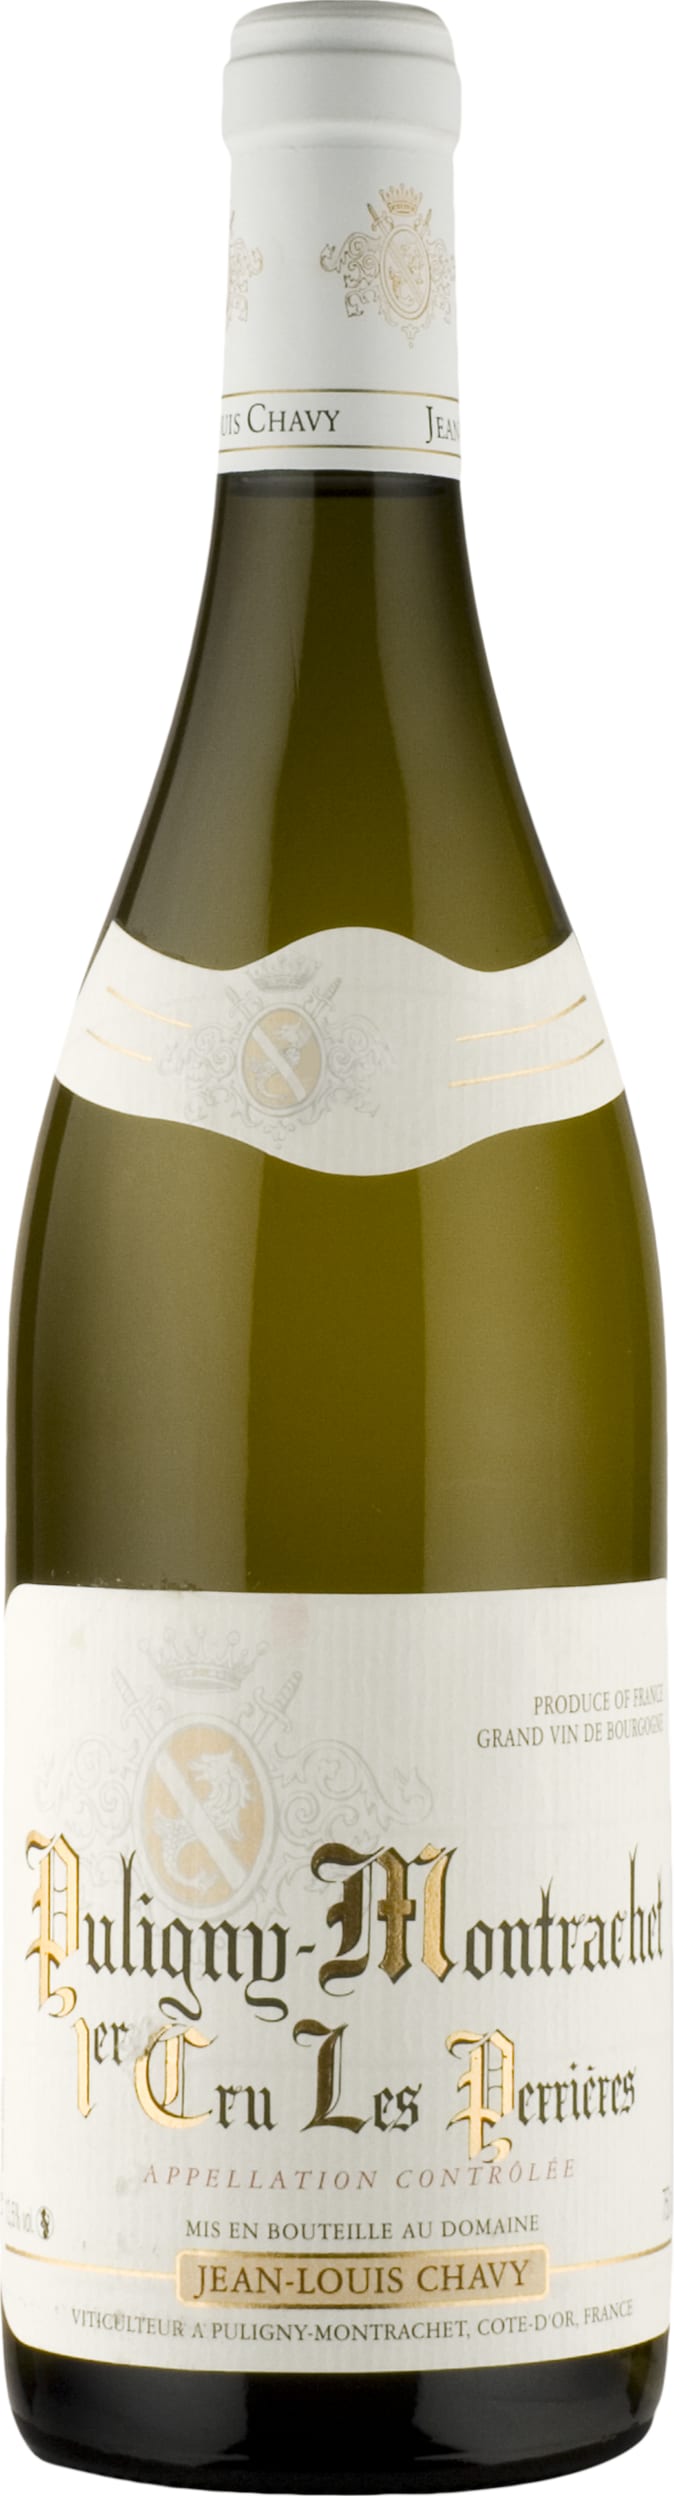 Jean Louis Chavy Puligny Montrachet 1er Cru Les Perrieres 2020 75cl - Buy Jean Louis Chavy Wines from GREAT WINES DIRECT wine shop